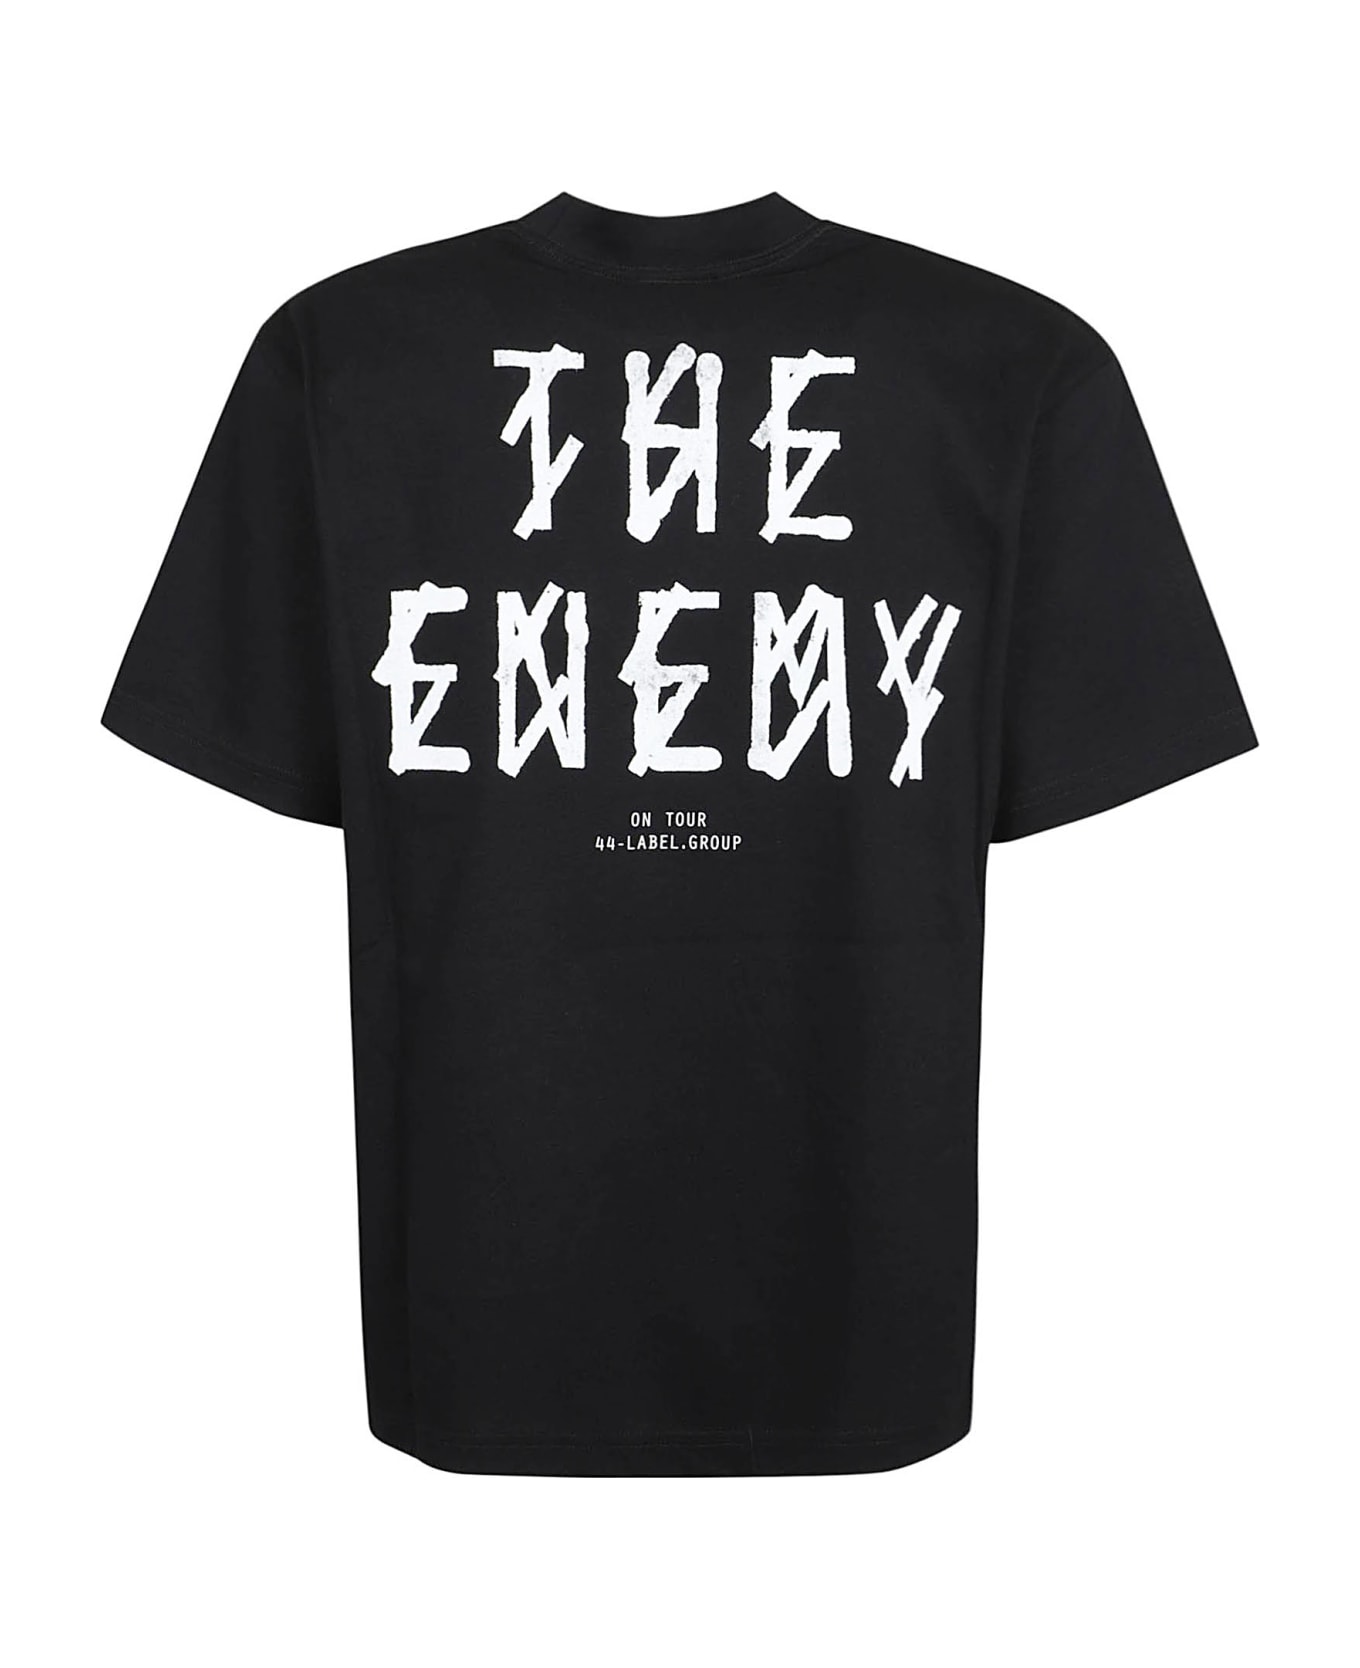 44 Label Group Classic Tee - Black The Enemy Print シャツ